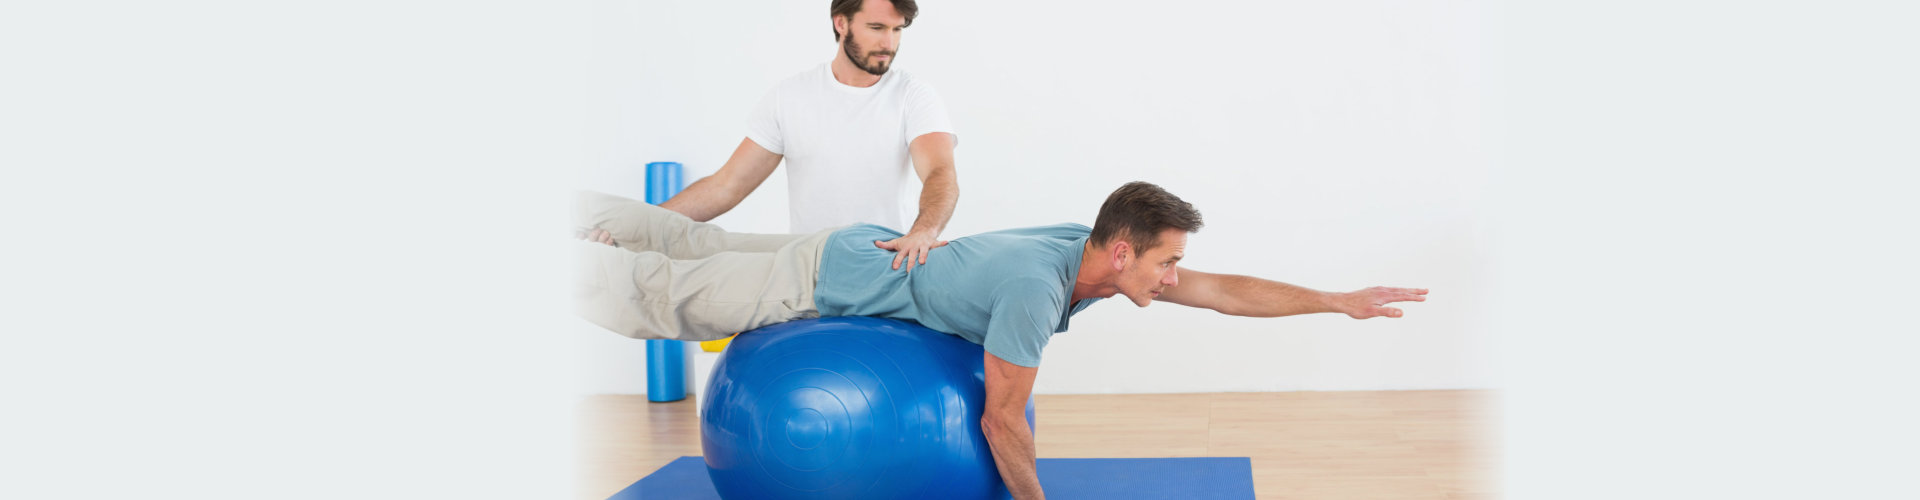 Physical therapist assisting a person on a yoga ball